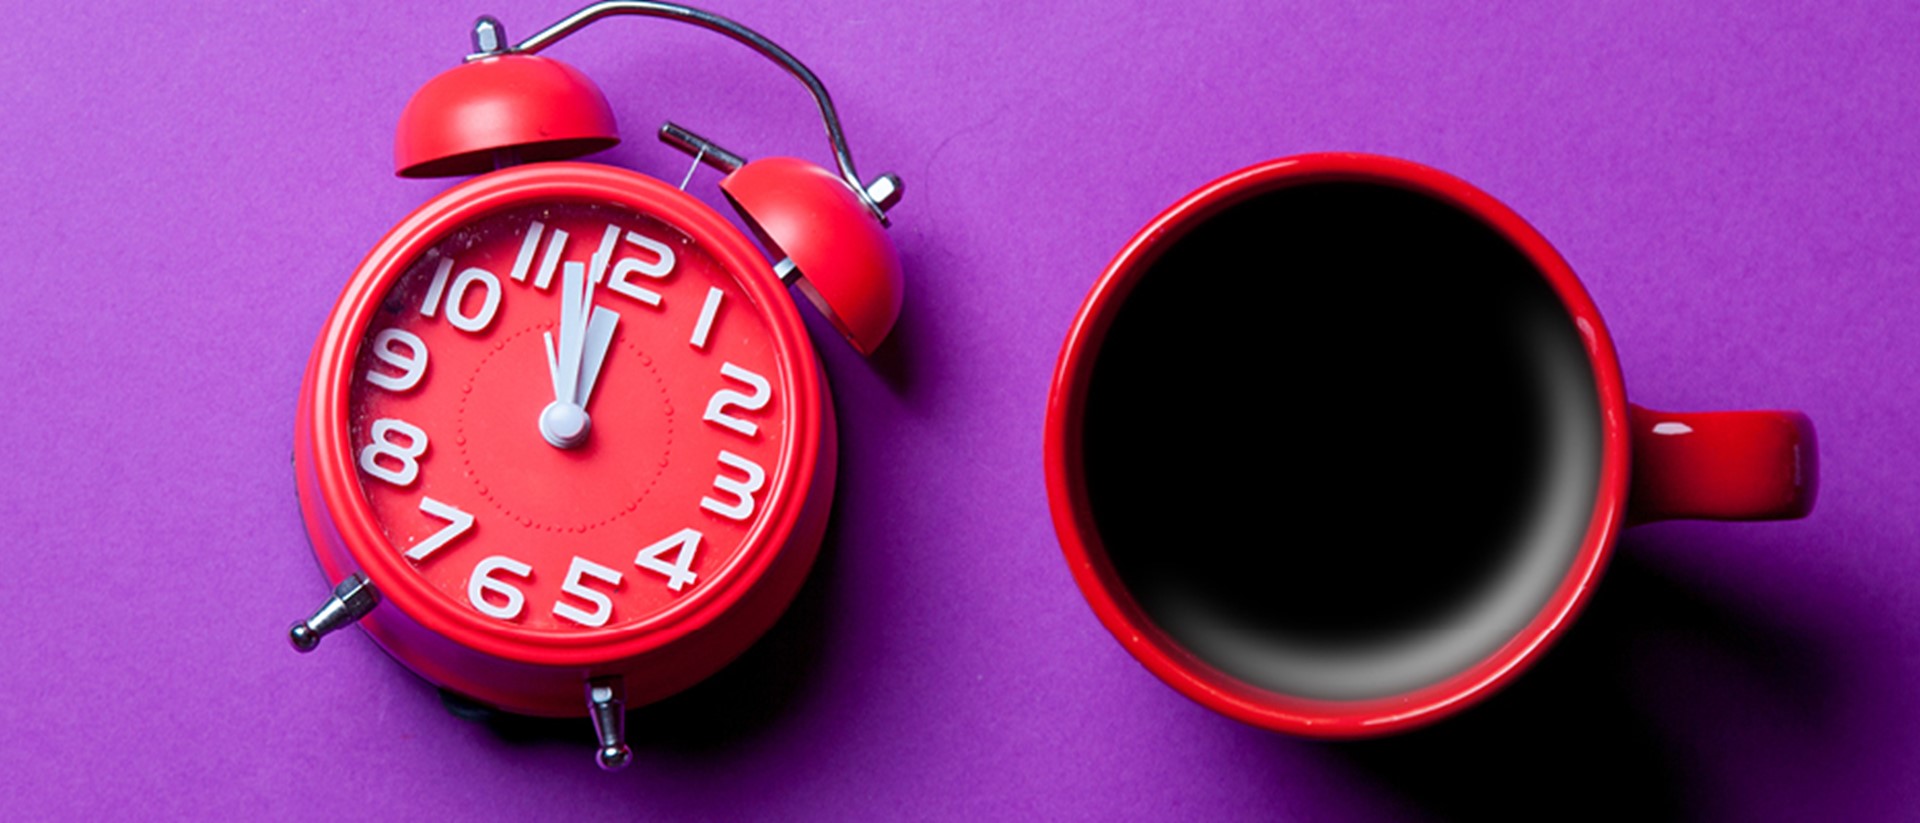 Top down image of red alarm clock and a mug of coffee on a purple background